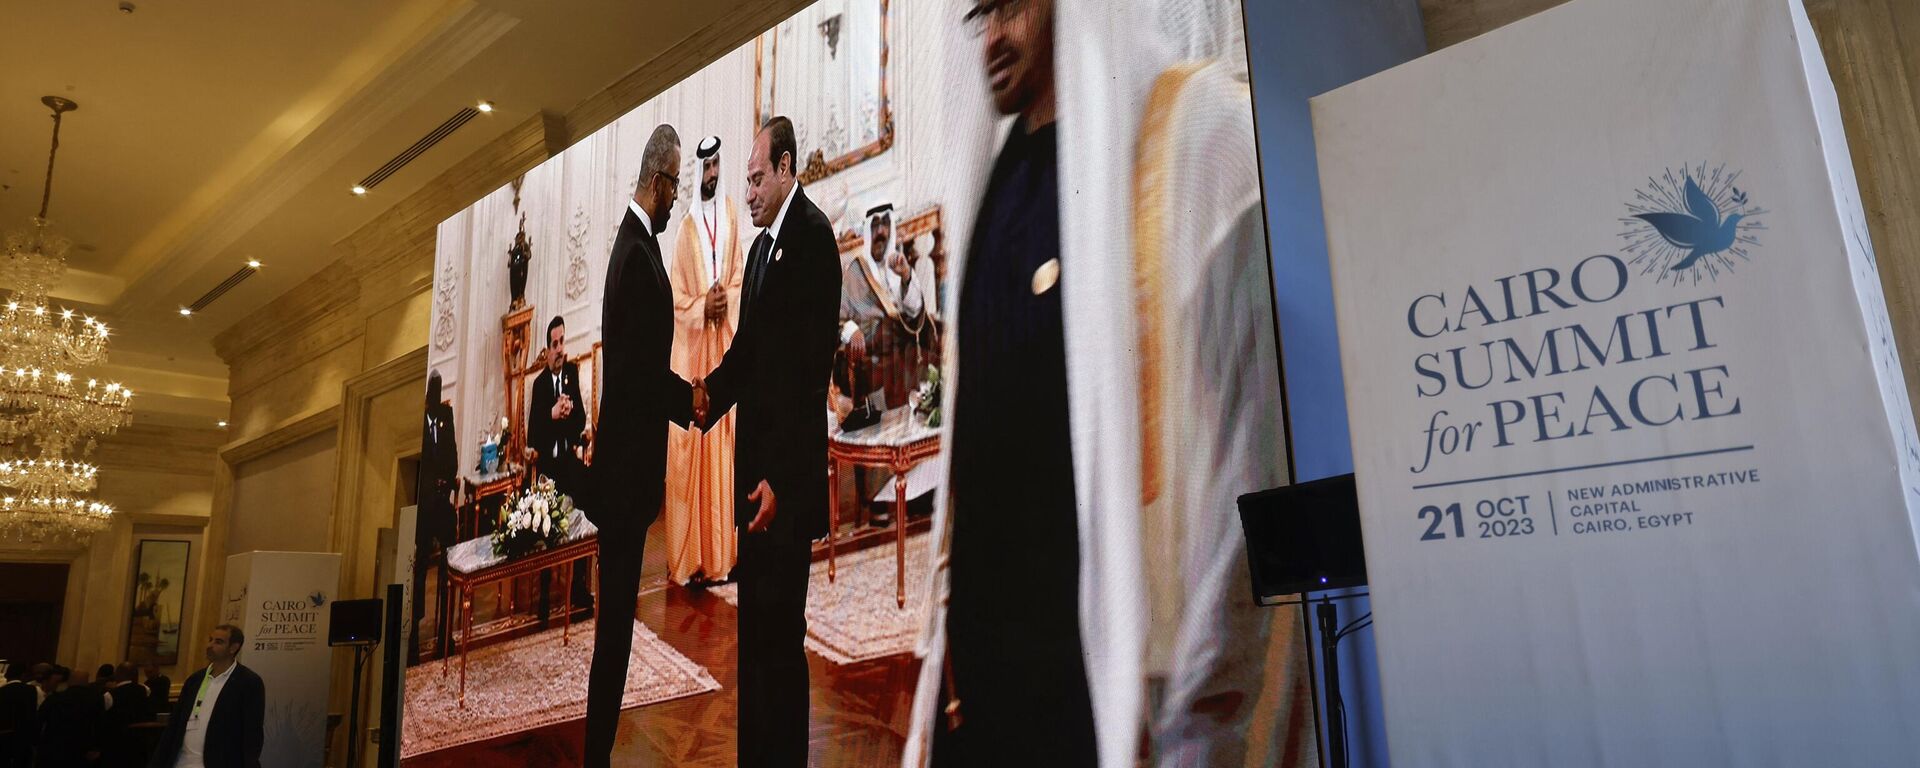 Seen on a large screen the British Secretary of State for Foreign, Commonwealth and Development Affairs James Cleverly is greeted by the Egyptian President Abdel-Fattah al-Sisi (2ndR) prior to the start of the International 'Summit for Peace' hosted by the Egyptian president in Cairo on October 21, 2023. - Sputnik International, 1920, 21.10.2023